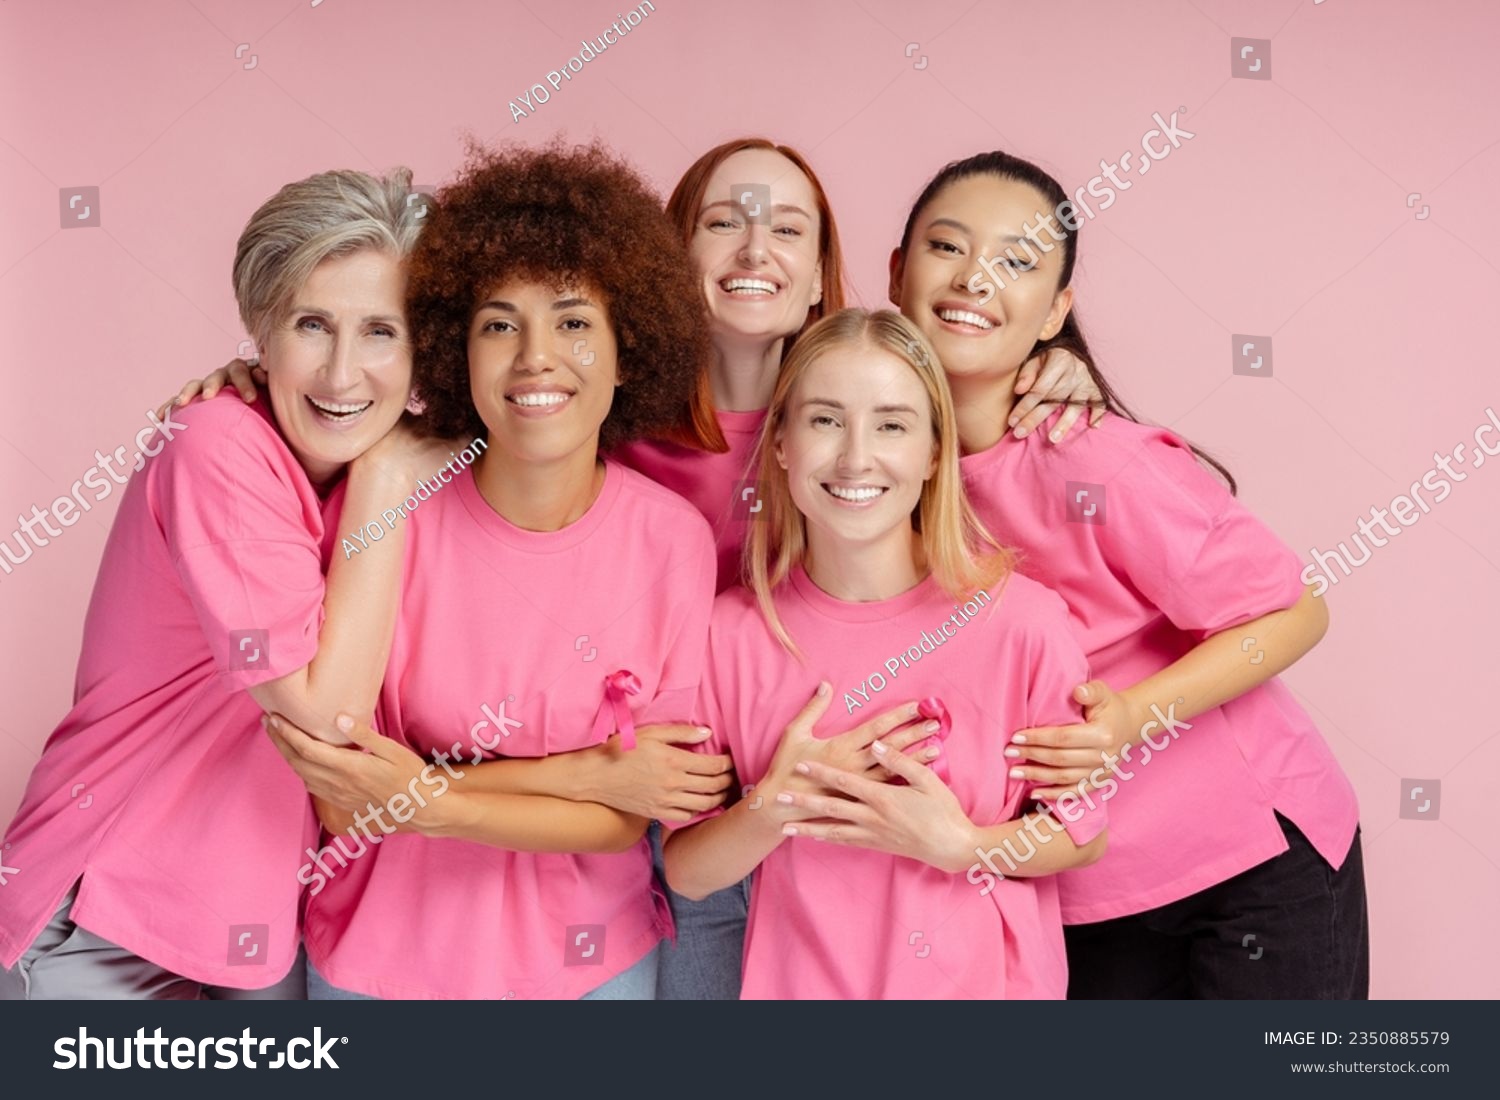 Group of smiling confident multiracial women wearing t shirts with pink ribbon looking at camera isolated on pink background. Health care, support, prevention. Breast cancer awareness month concept #2350885579